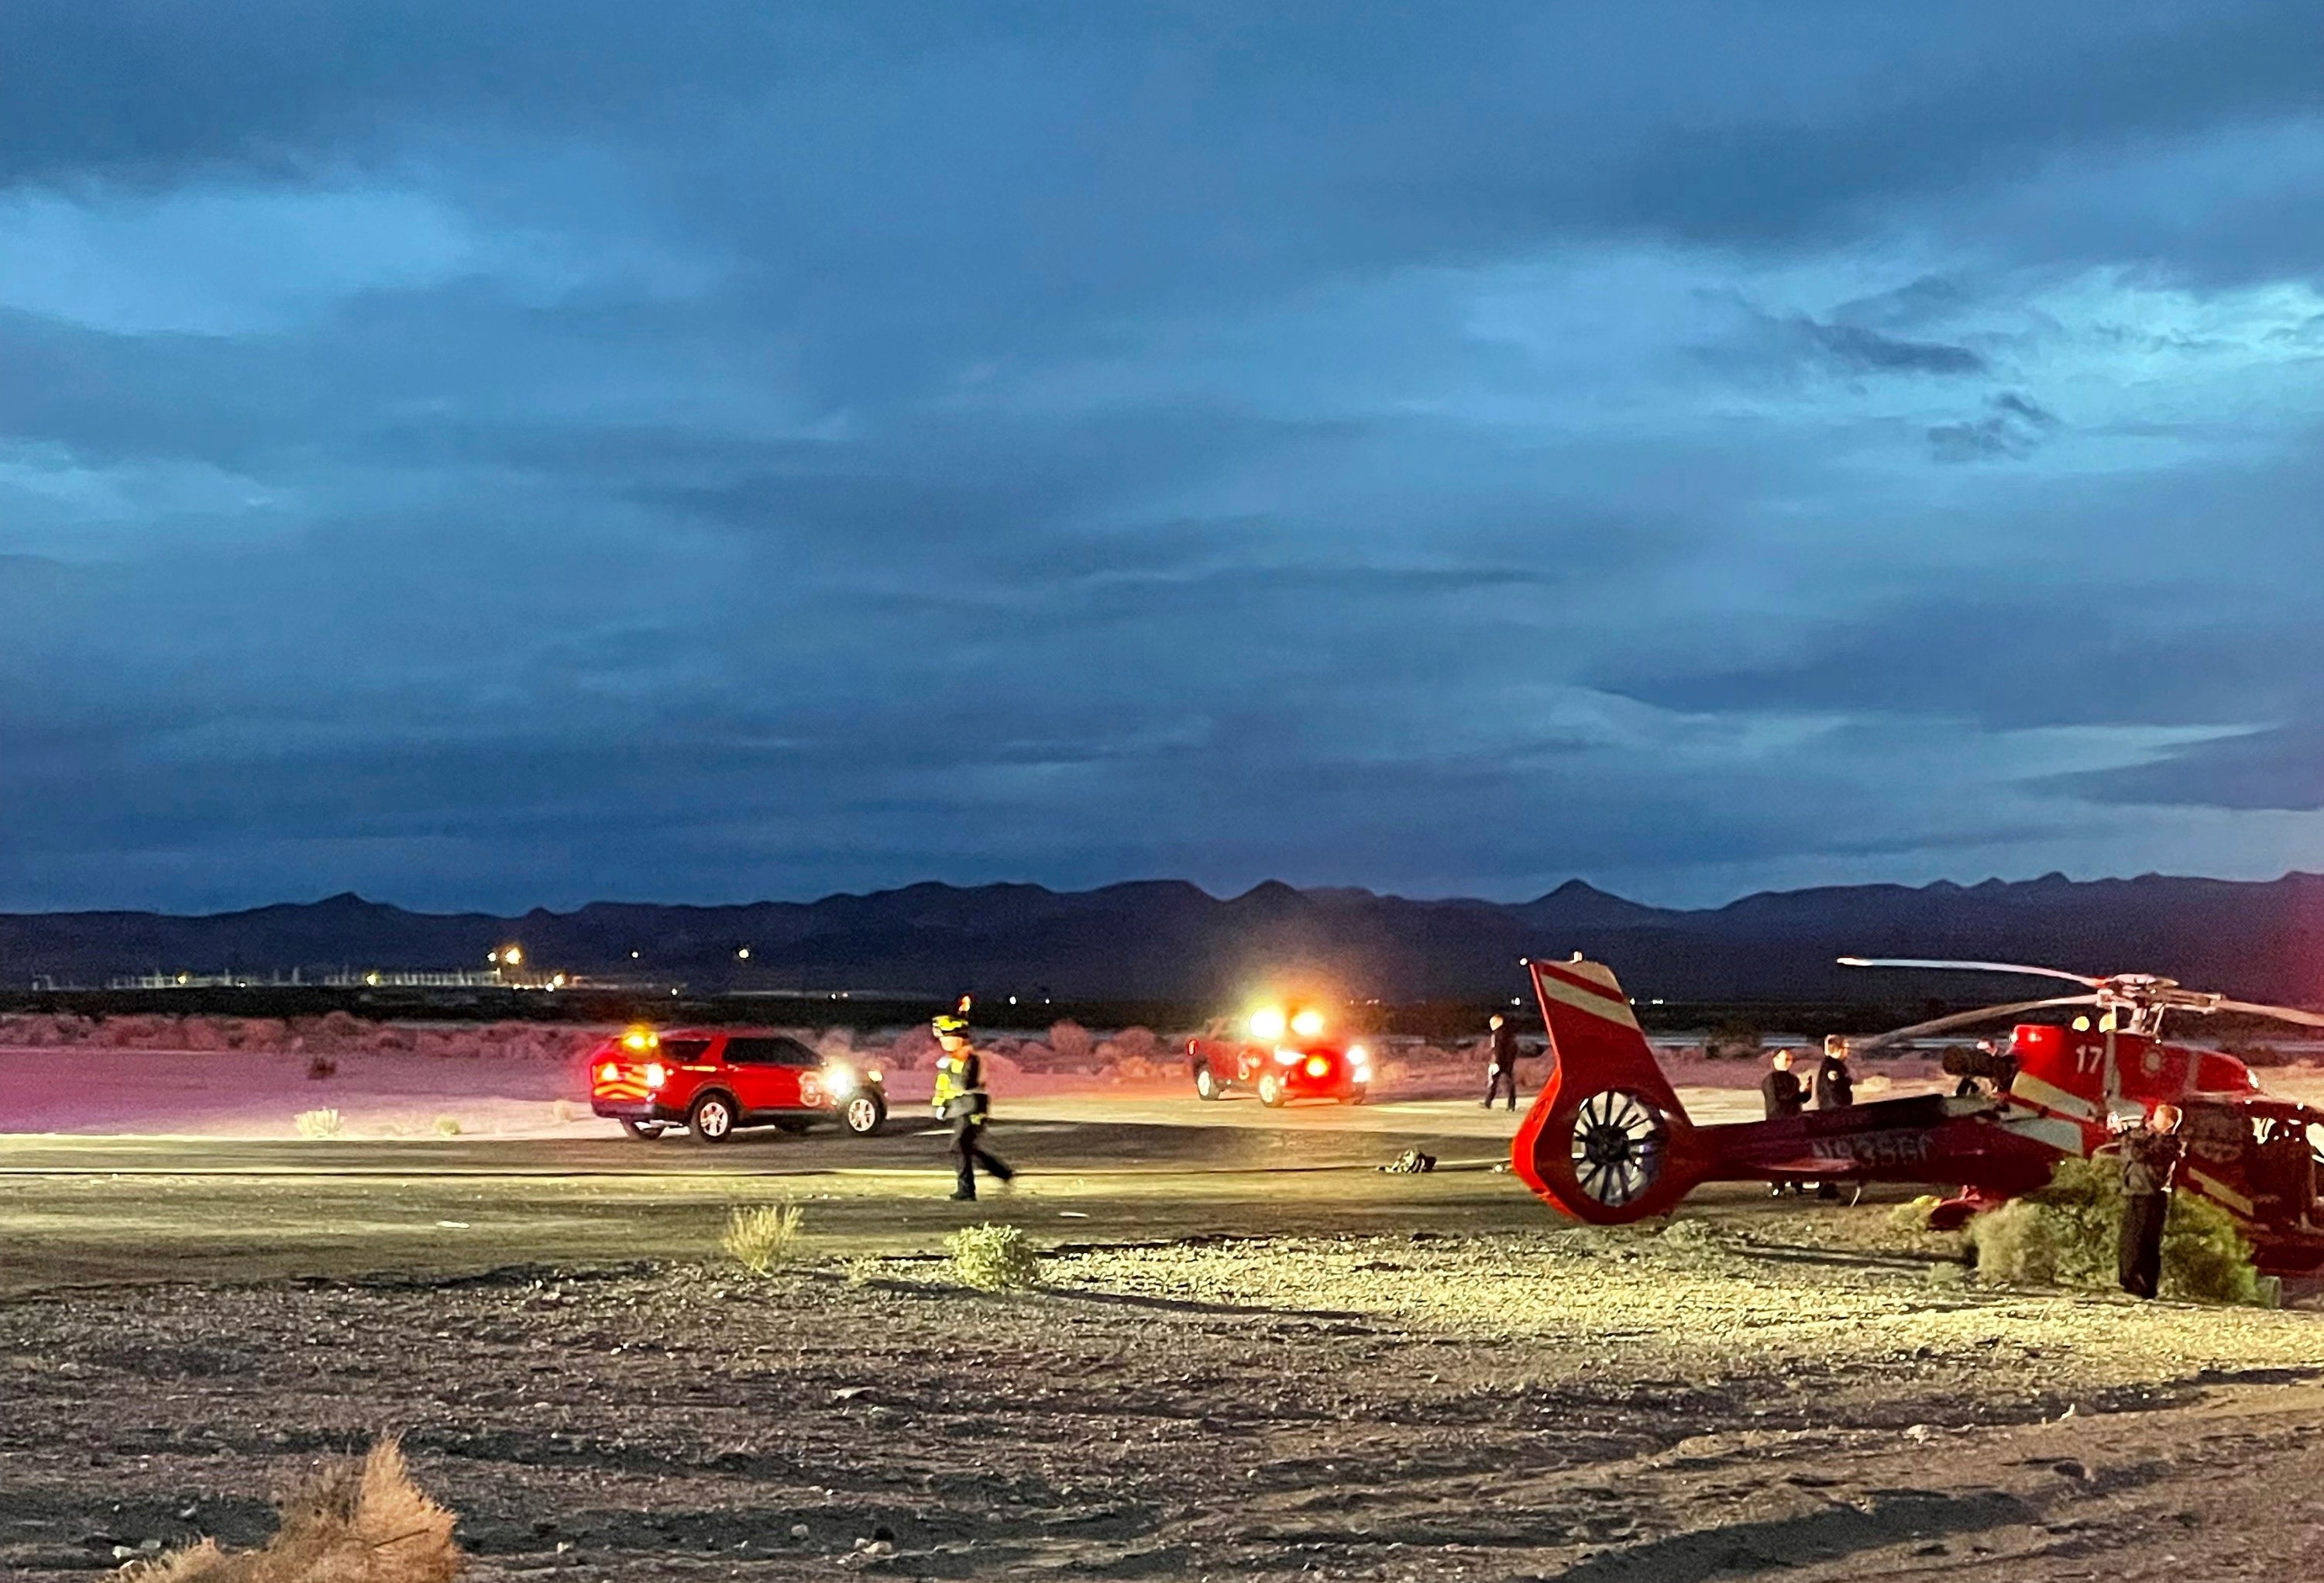 Grand Canyon tour helicopter makes hard landing in Nevada, 7 injured including pilot